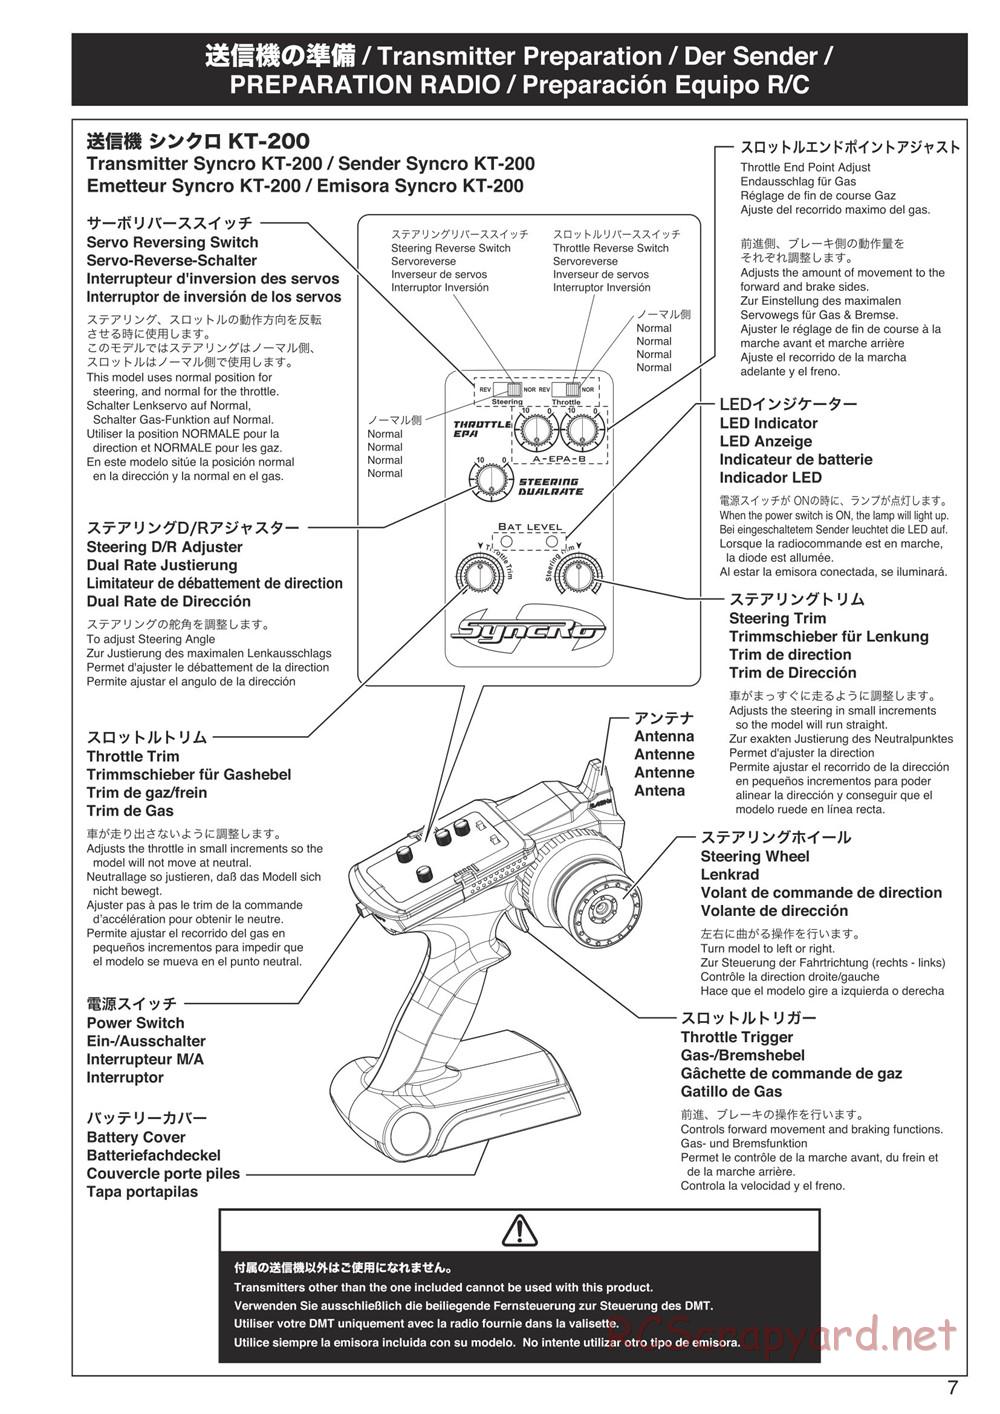 Kyosho - DMT - Manual - Page 7